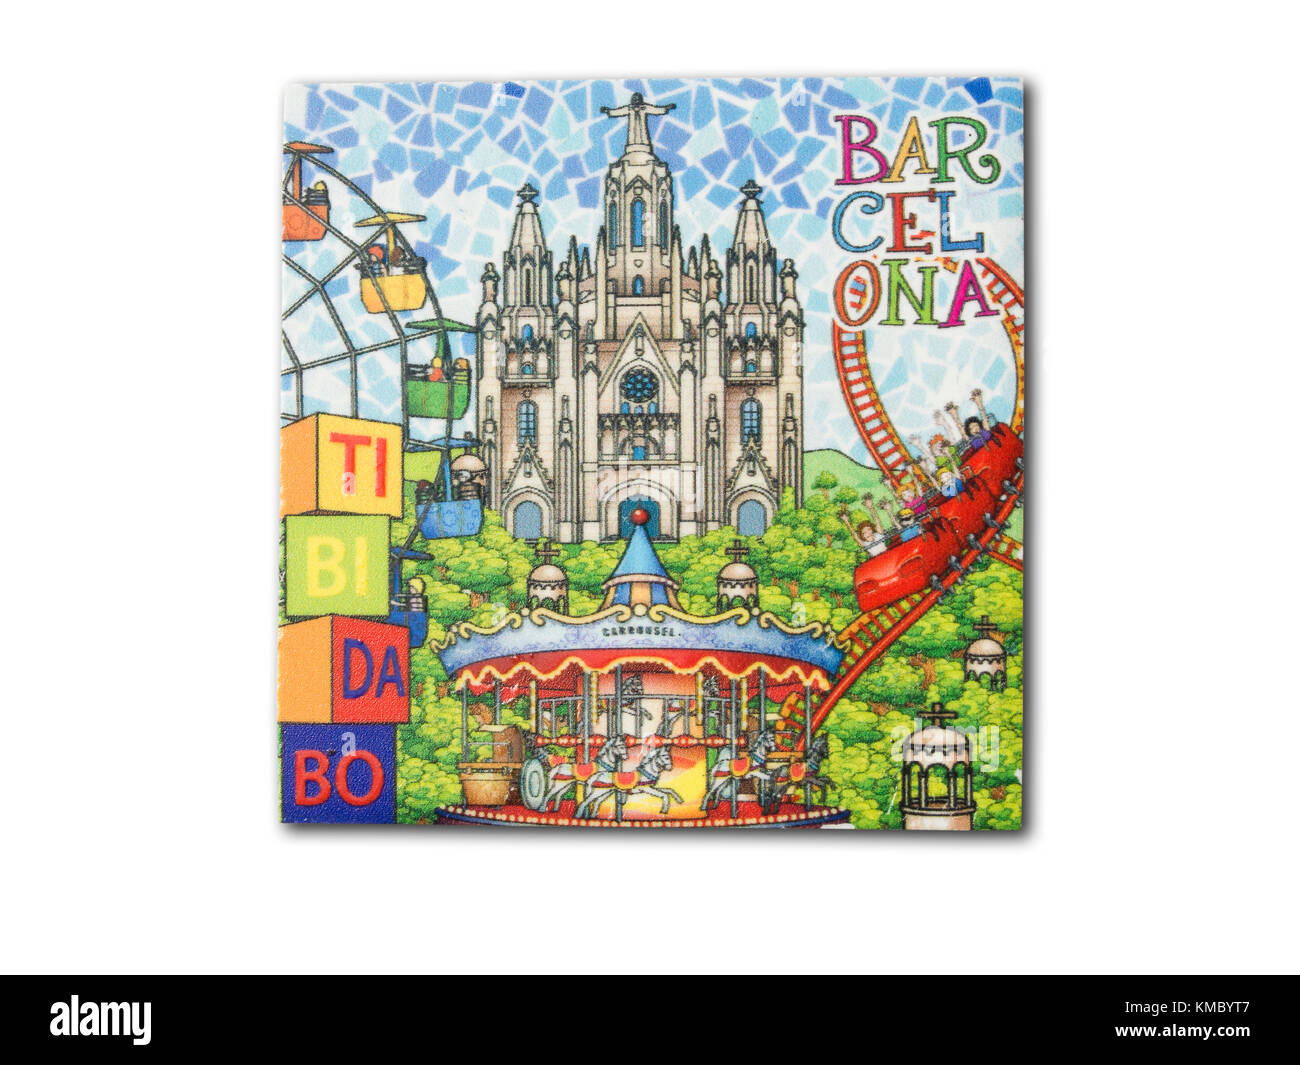 Barcelona souvenir refrigerator magnet isolated on white background Stock Photo